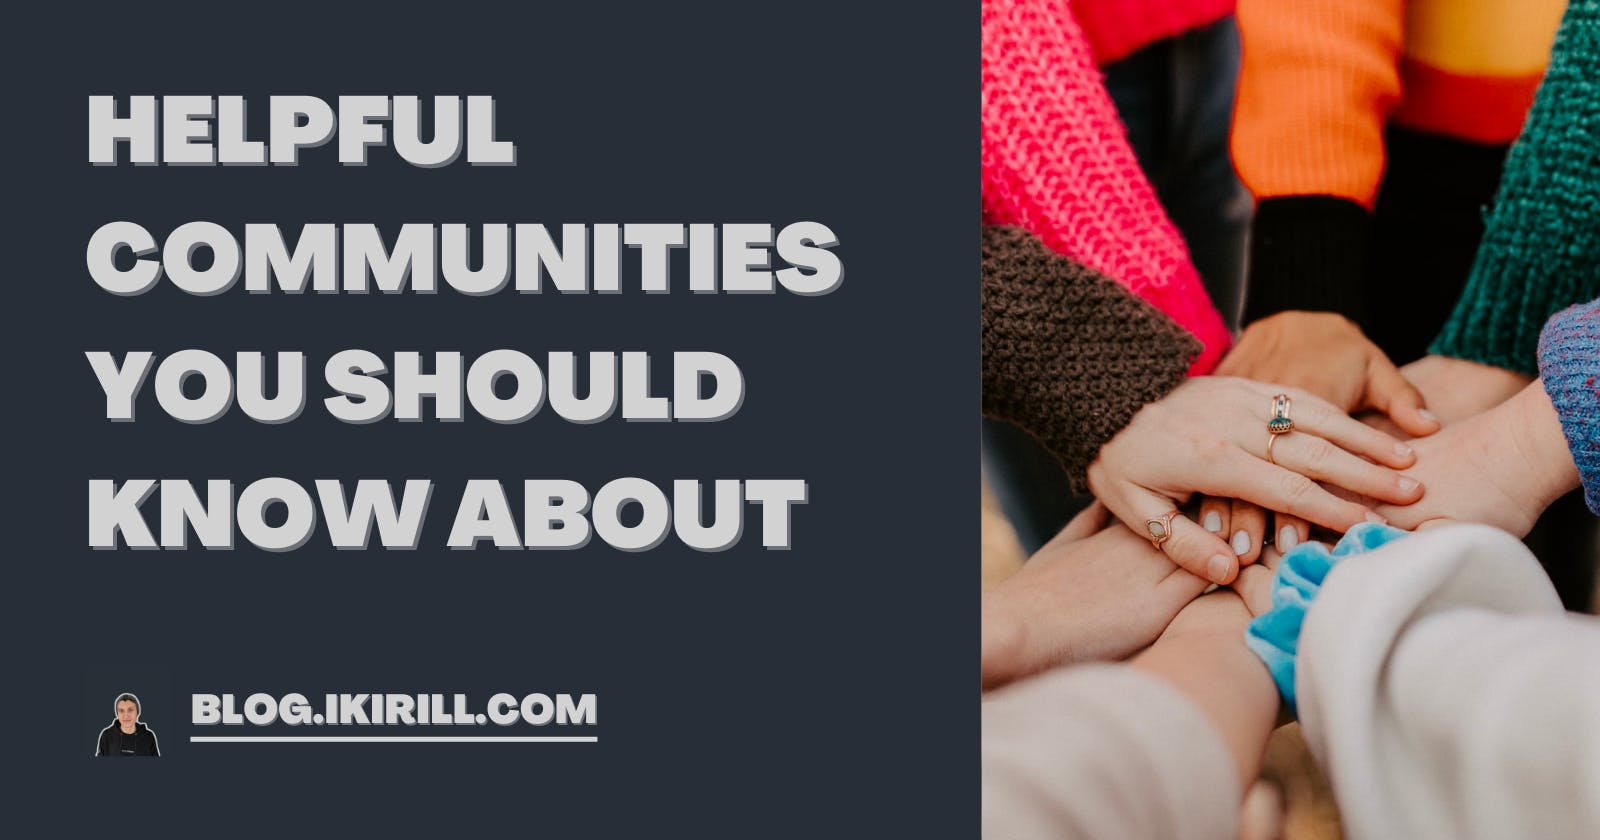 Helpful Communities You Should Know About